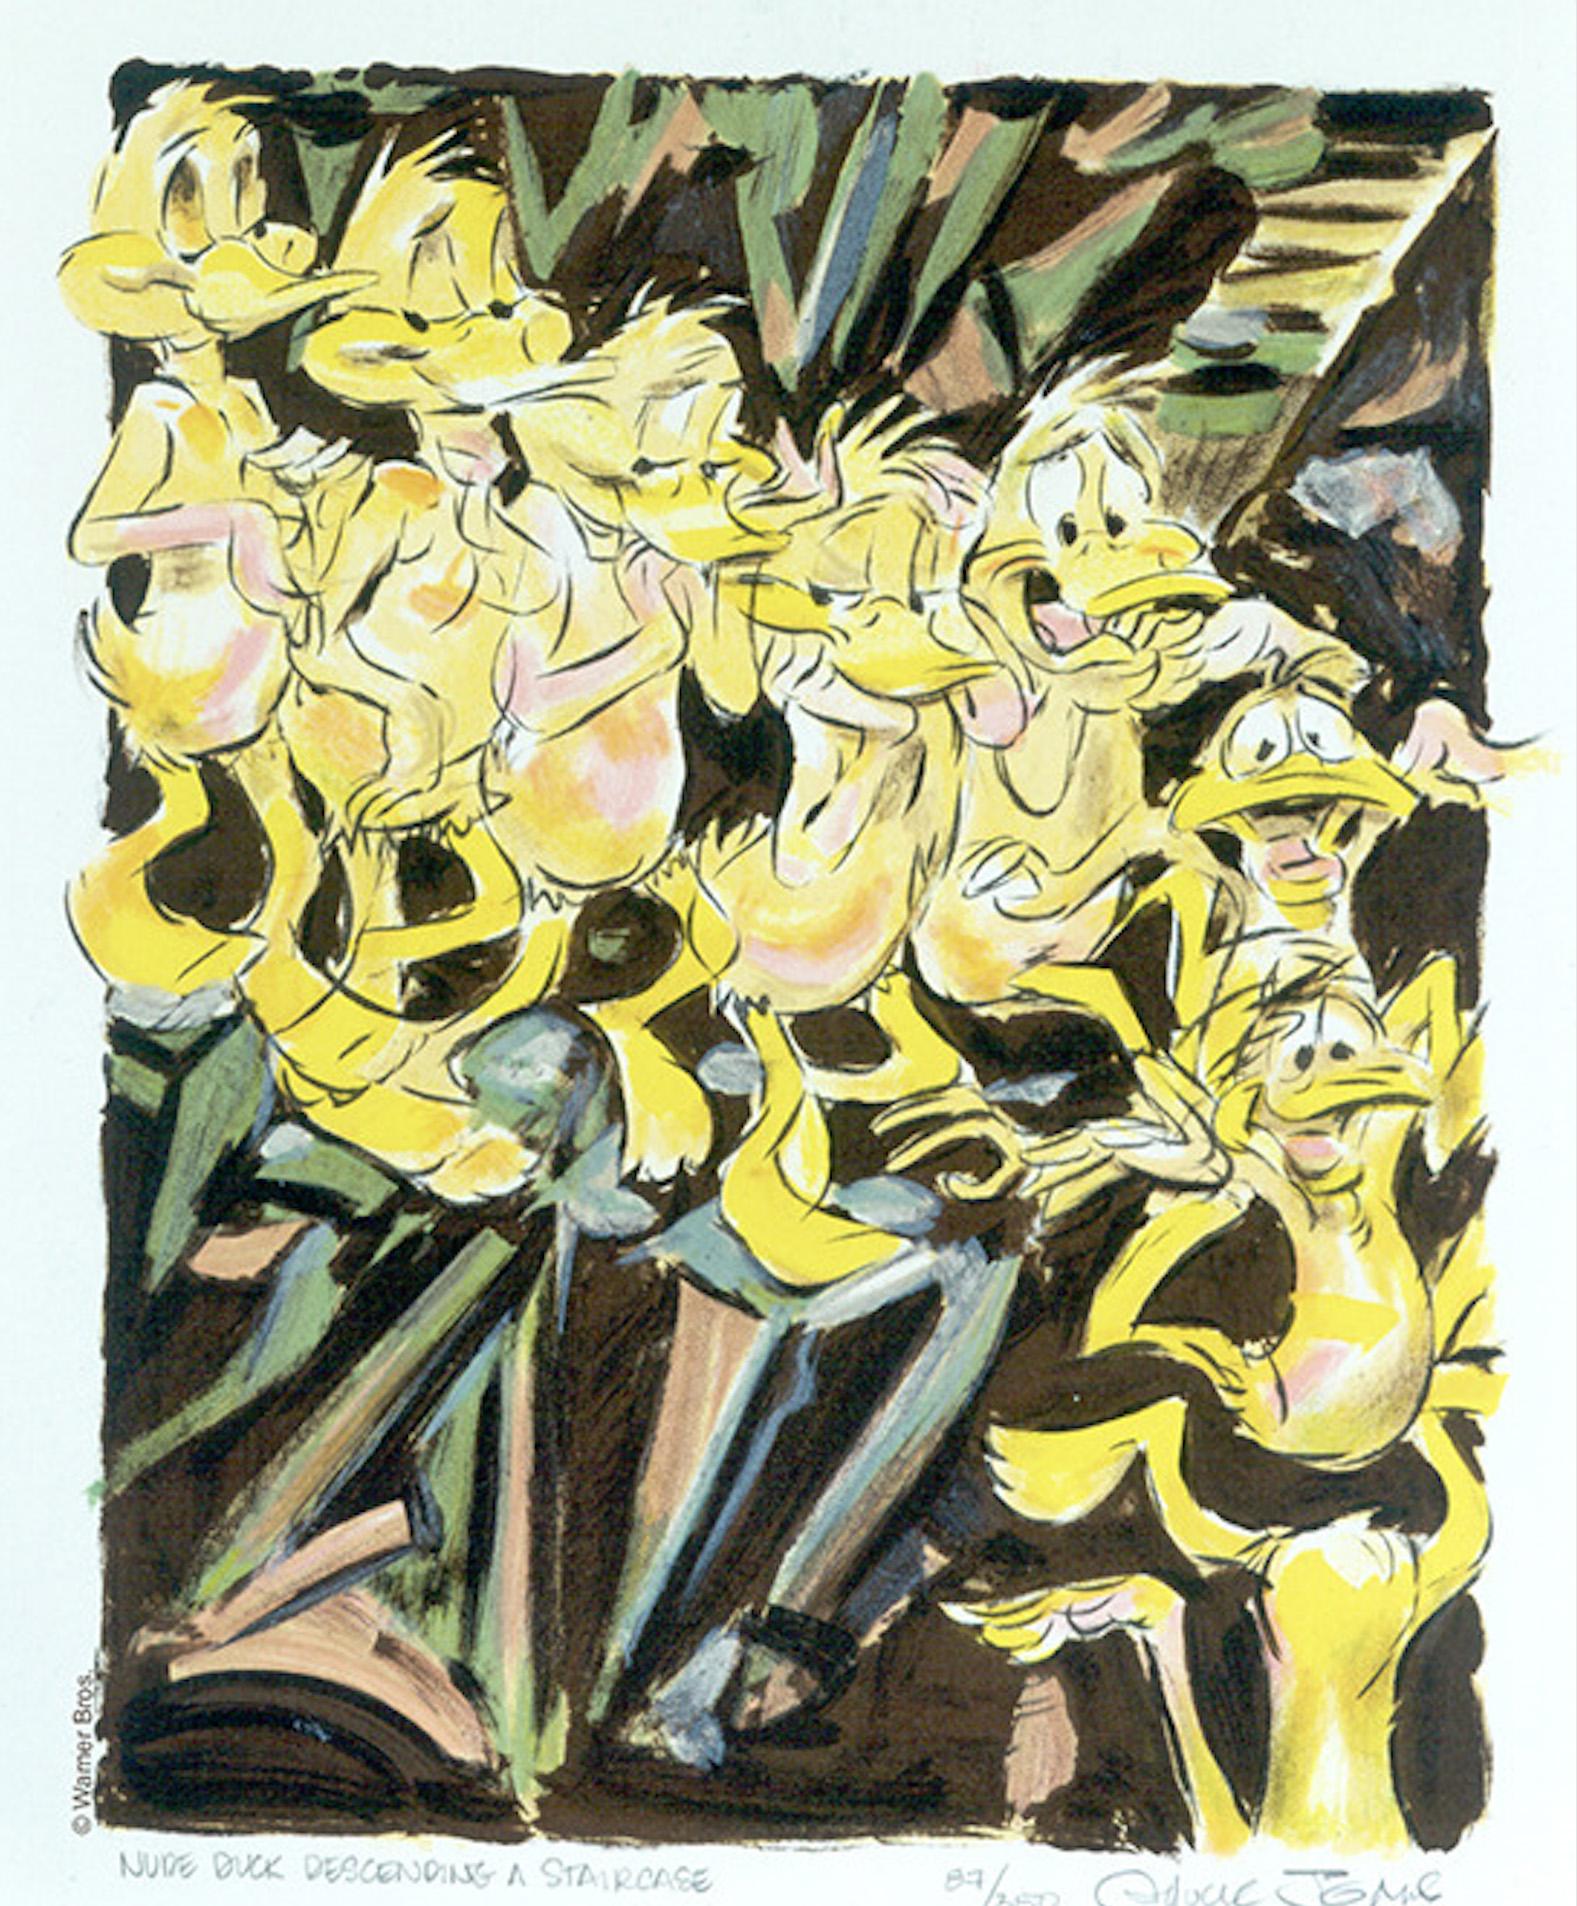 NUDE DUCK DESCENDING A STAIRCASE

MEDIUM: Lithograph 
SIZE: 11" x 9"
EDITION SIZE: 350
SKU: LITHO-104

ABOUT THE IMAGE: Chuck Jones painted Daffy Duck into the style of Marcel Duchamp.